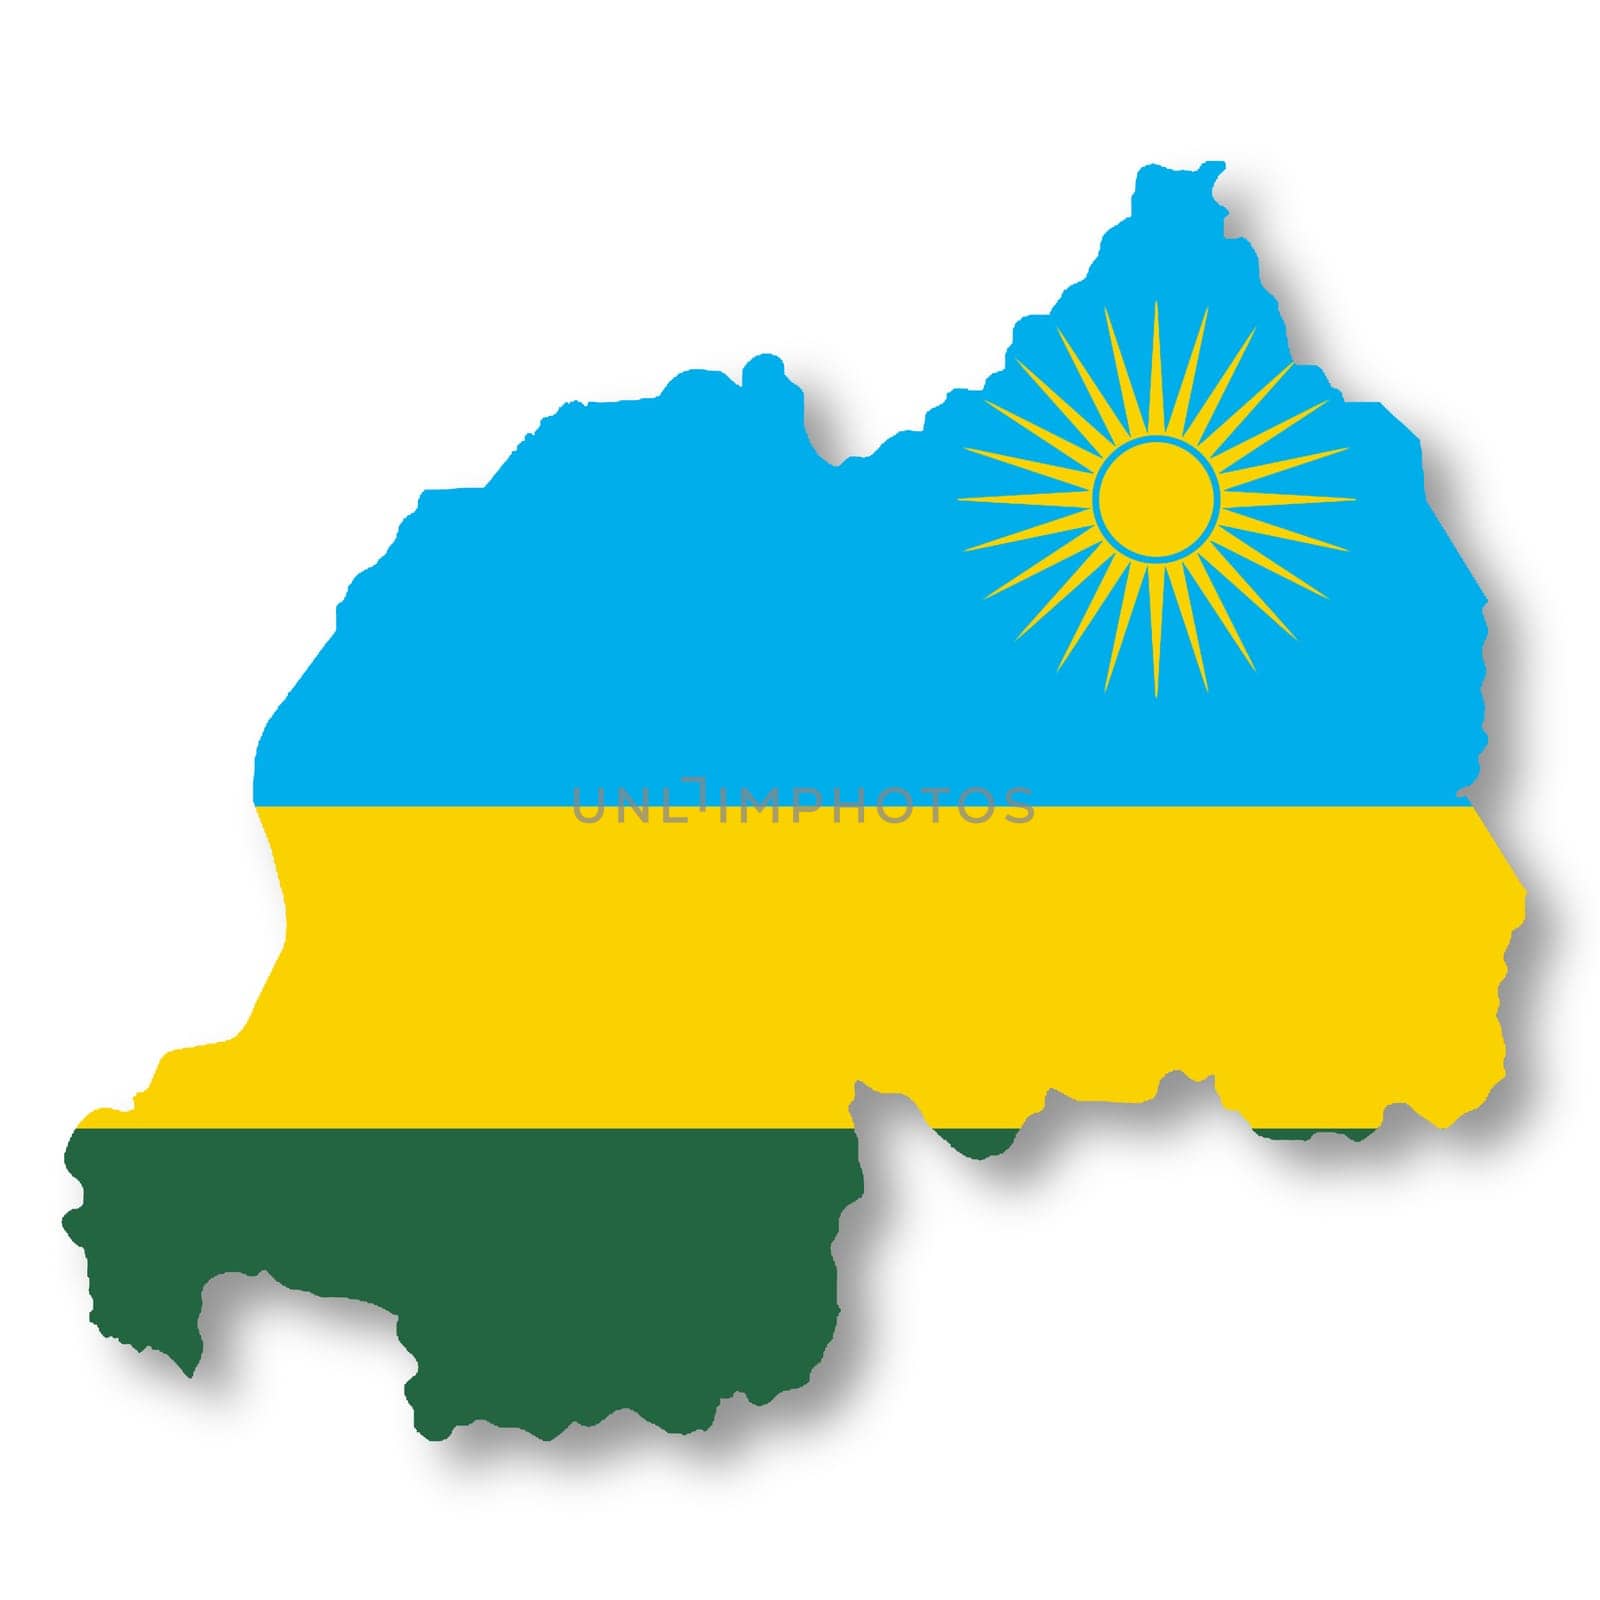 A Rwanda flag map on white background with clipping path